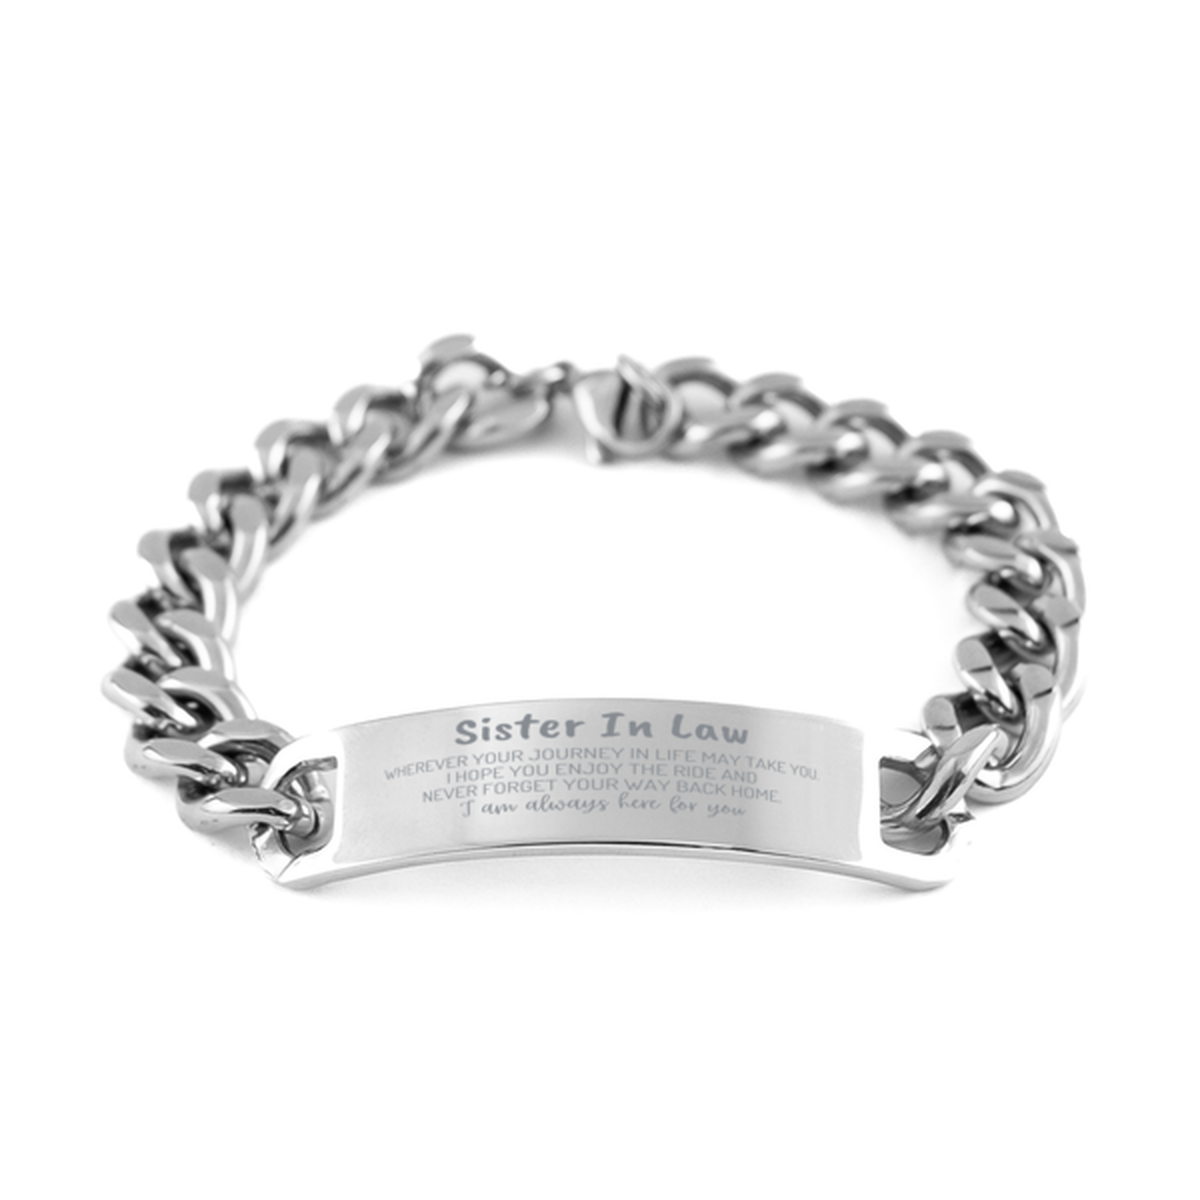 Sister In Law wherever your journey in life may take you, I am always here for you Sister In Law Cuban Chain Stainless Steel Bracelet, Awesome Christmas Gifts For Sister In Law, Sister In Law Birthday Gifts for Men Women Family Loved One